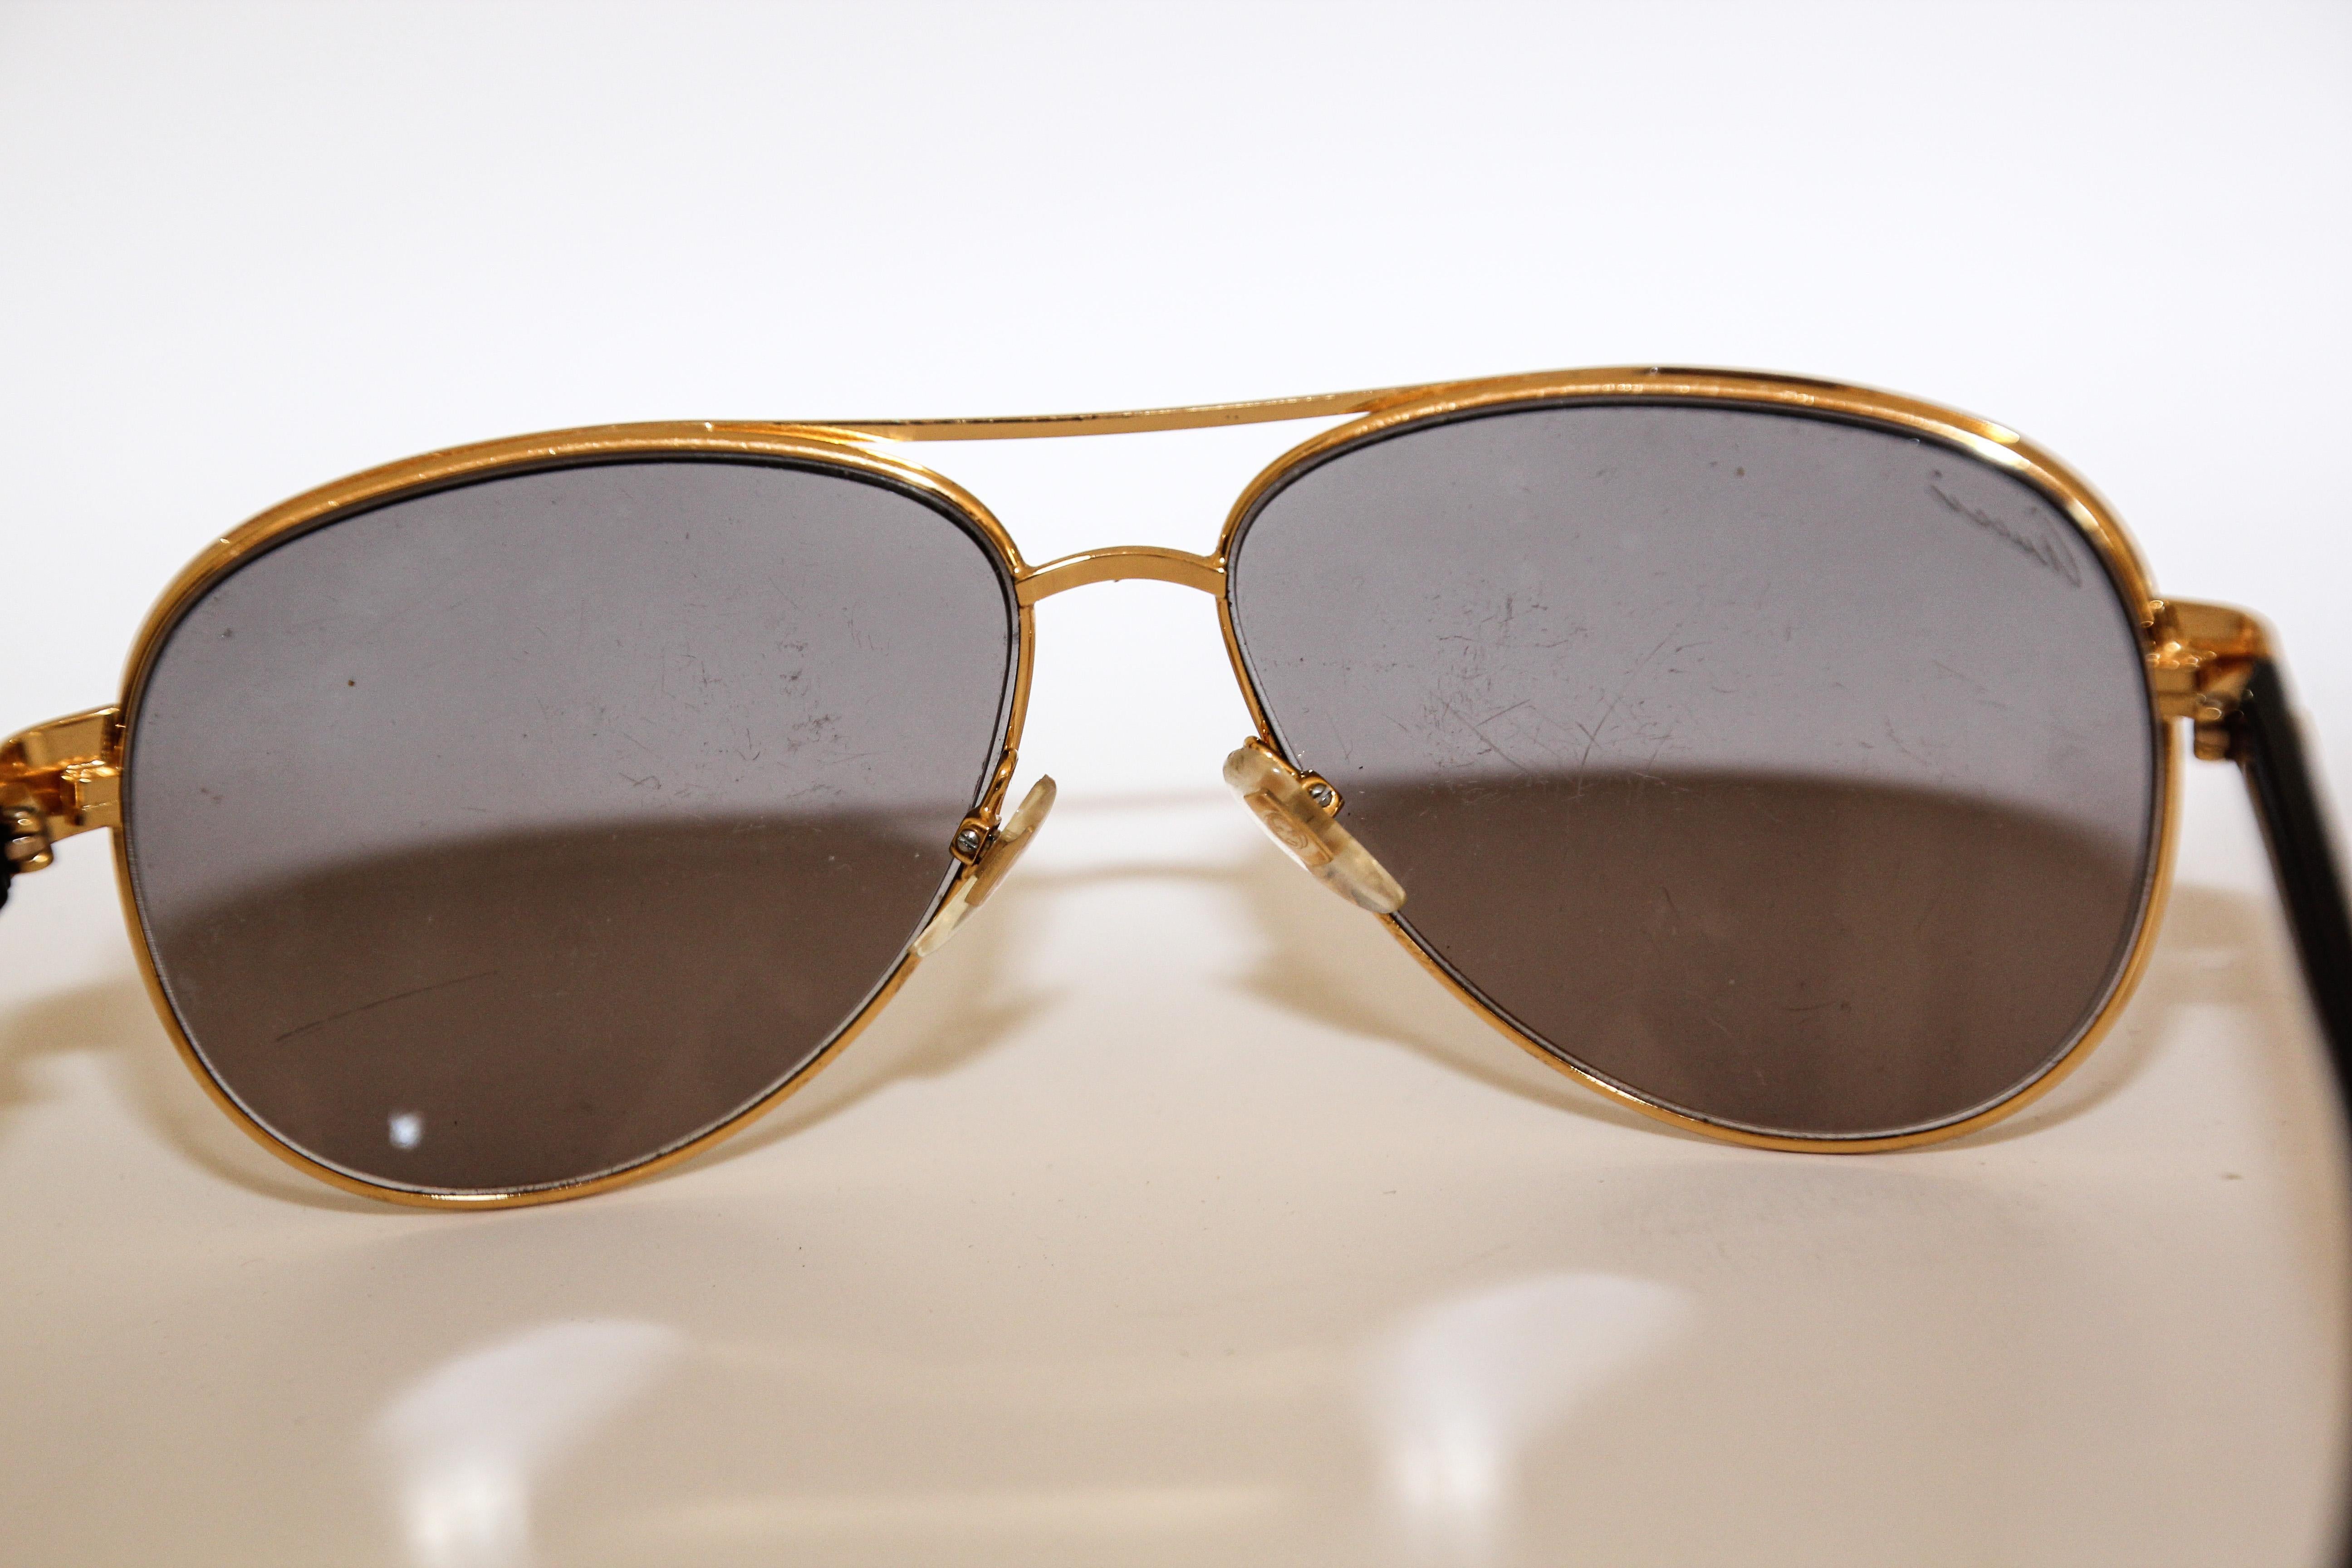 Vintage Gucci Aviator Sunglasses 1990's Made in Italy For Sale 2